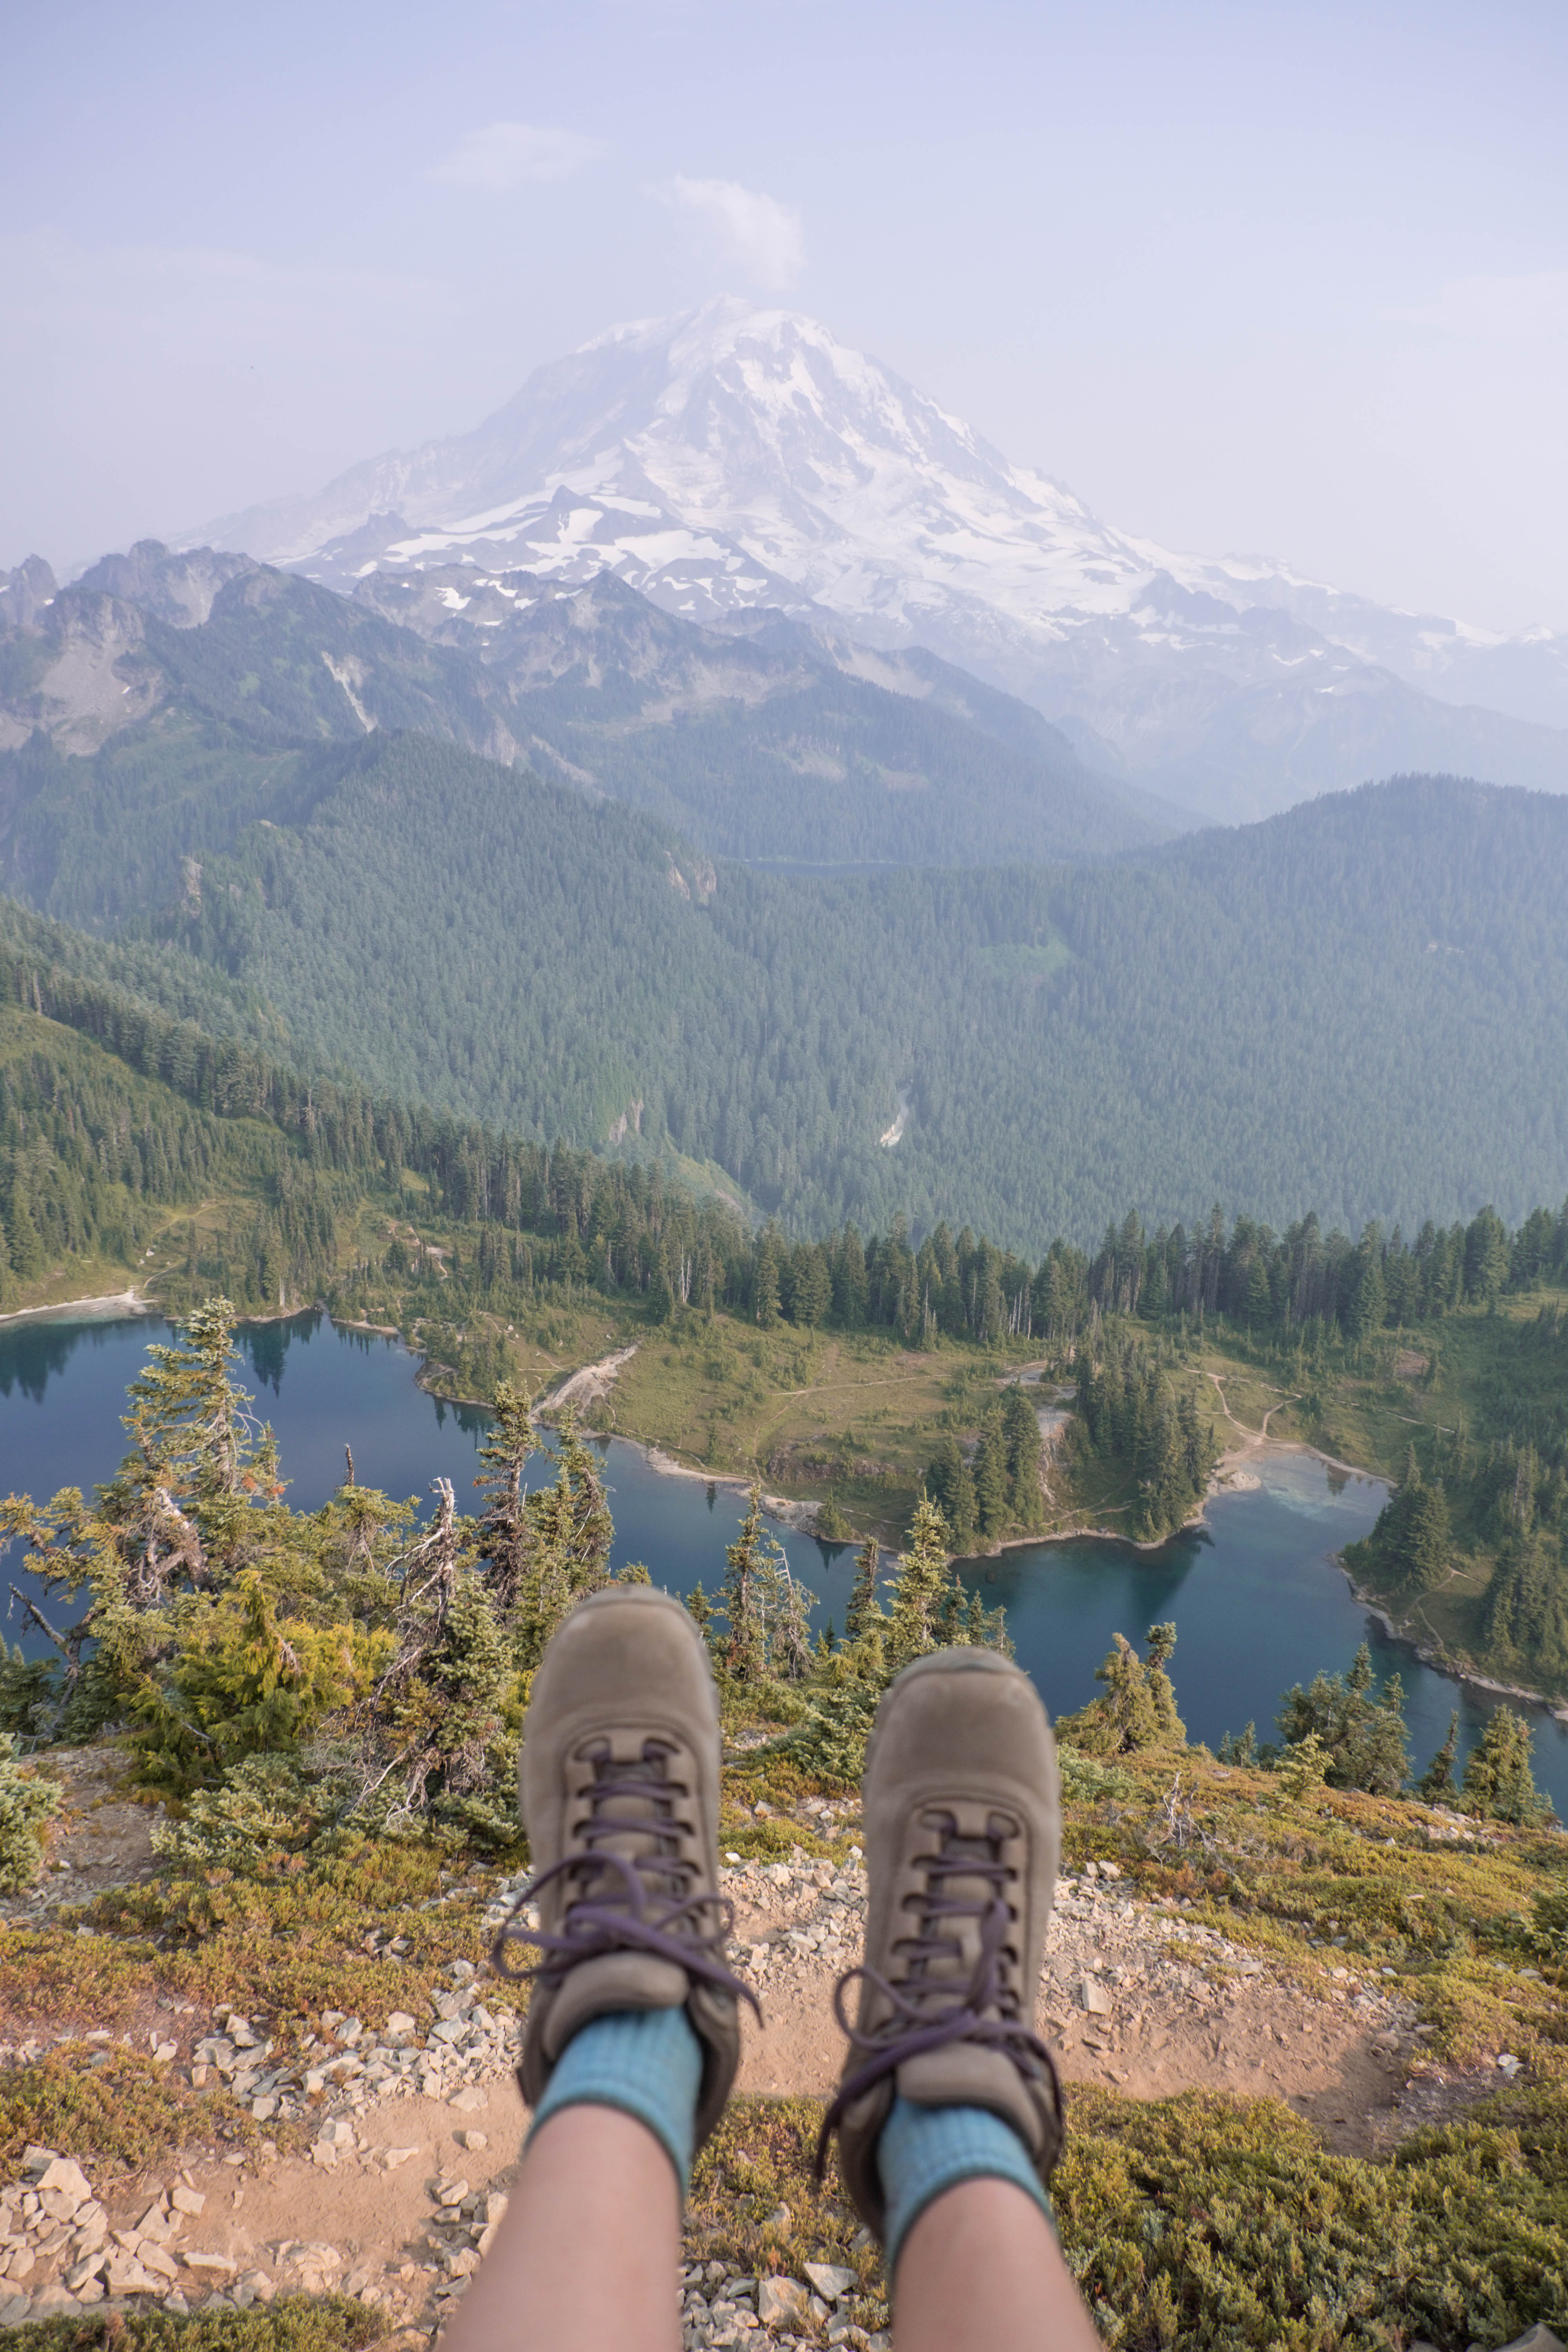 The Best Hikes in the Greater Seattle Area